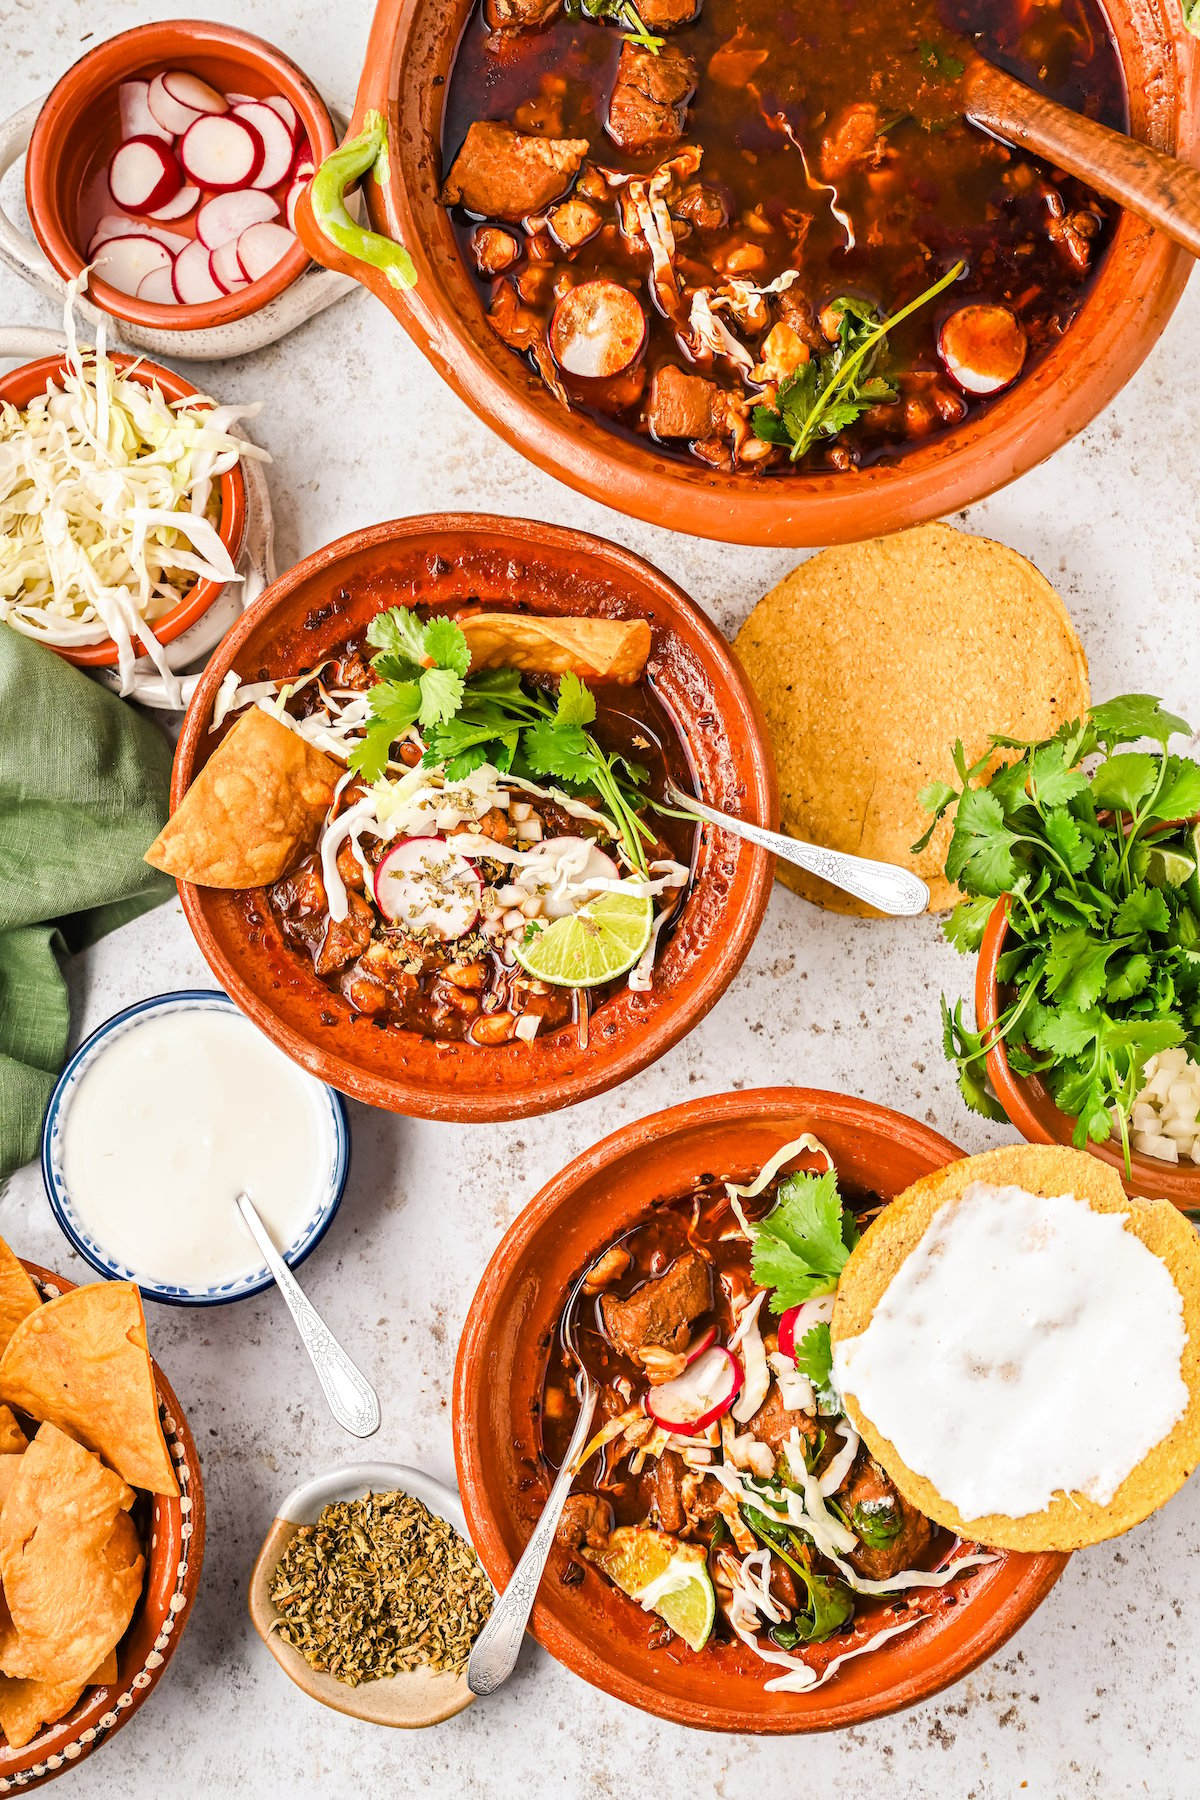 Bowls of red pozole with toppings.